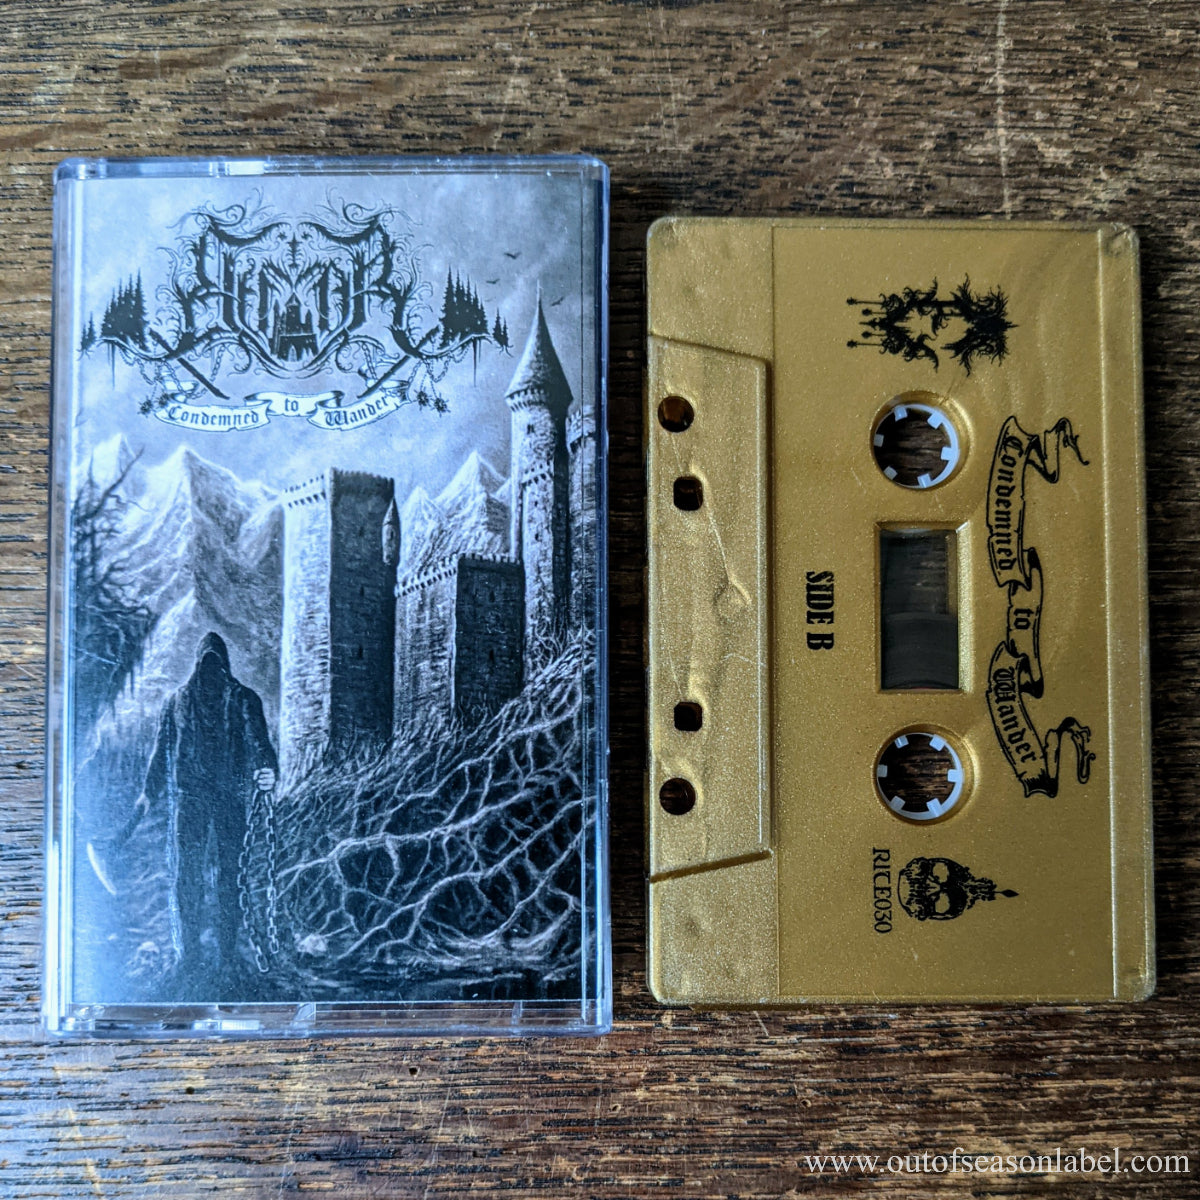 [SOLD OUT] ELFFOR "Condemned to Wander" Cassette Tape (Lim. 100)